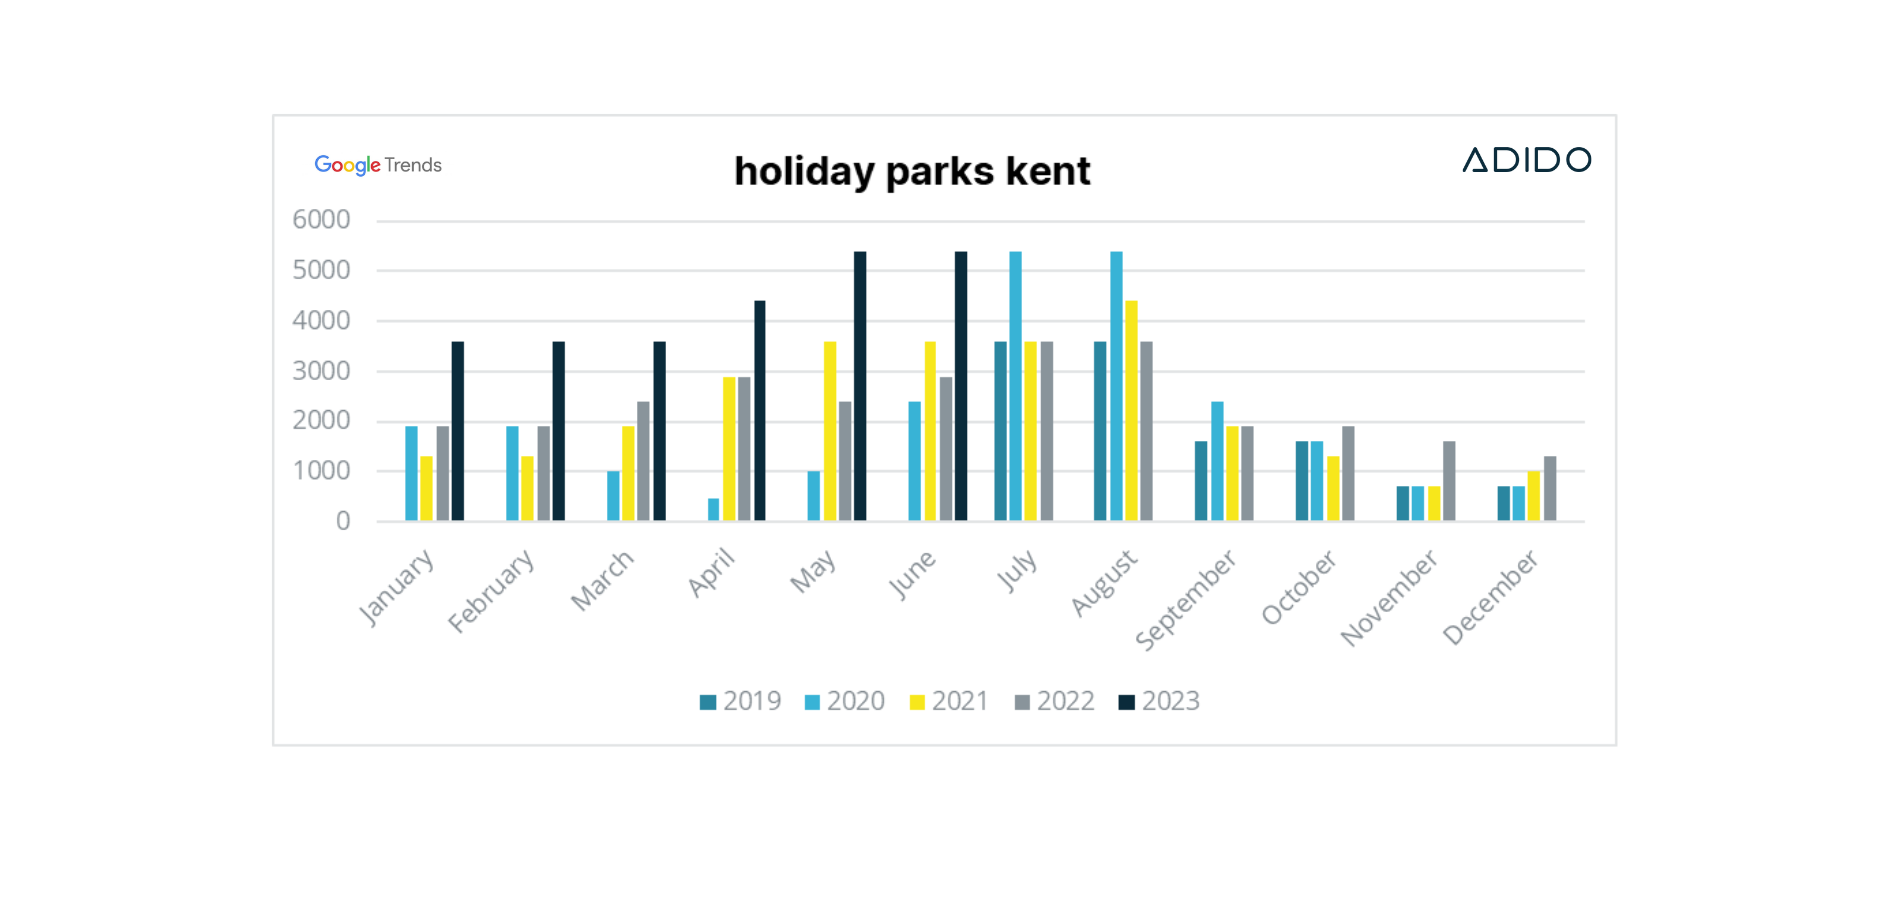 Holiday parks kent search trend 2019 2023